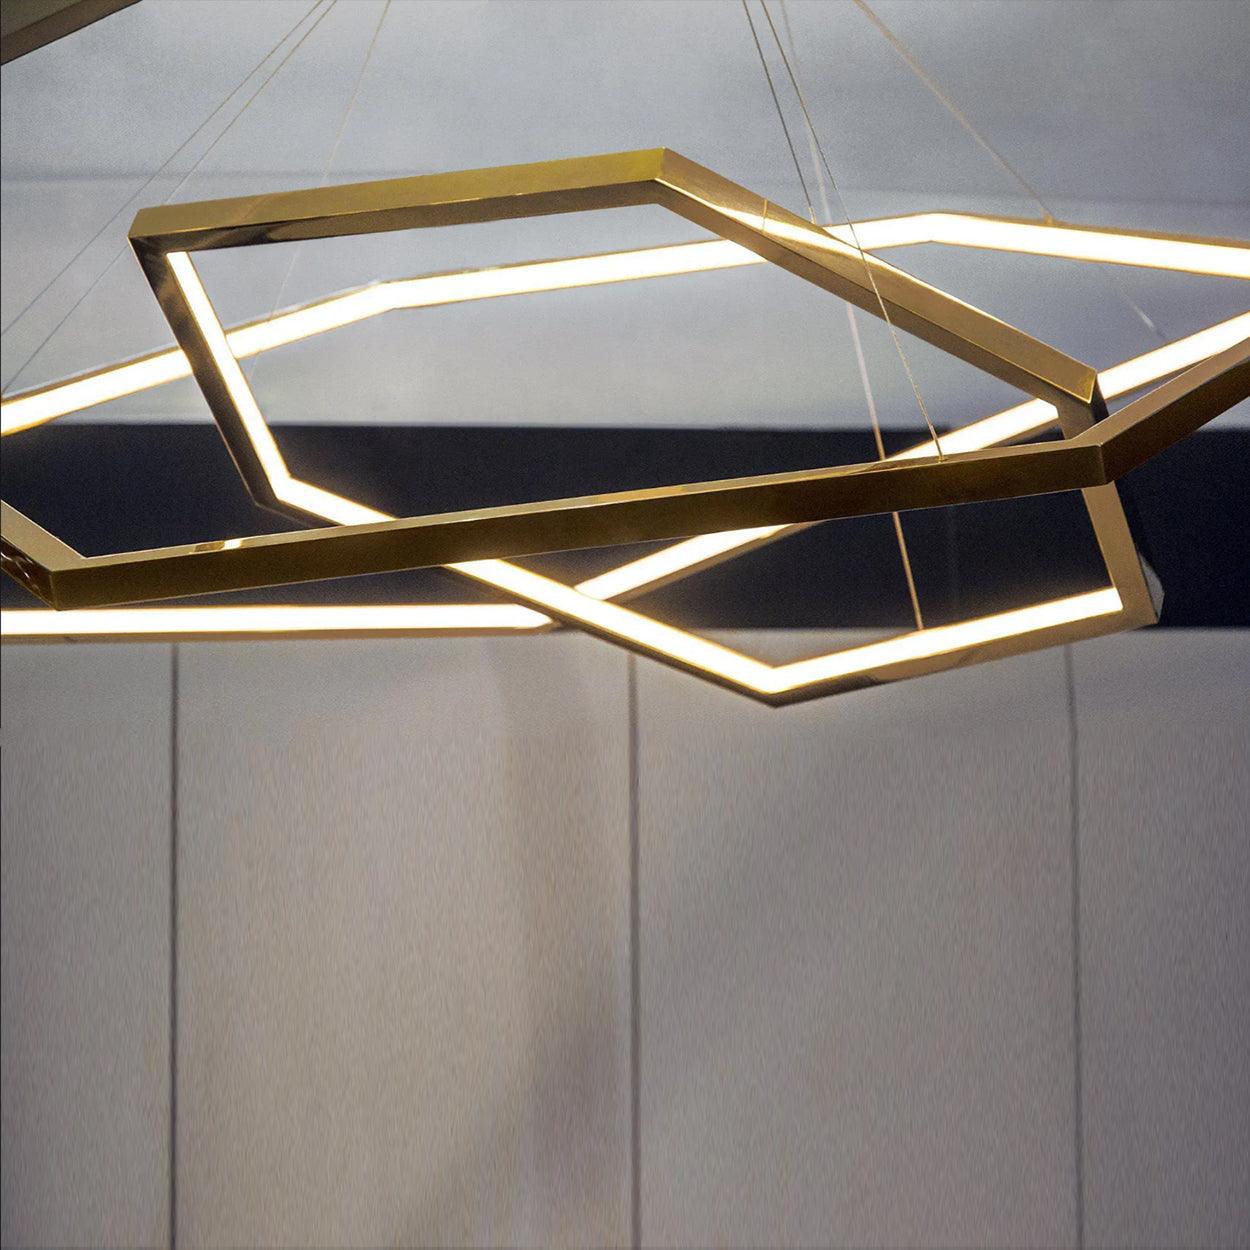 ANKUR GEOM HEXAGON 3 RING CONTEMPORARY LED CHANDELIER at the